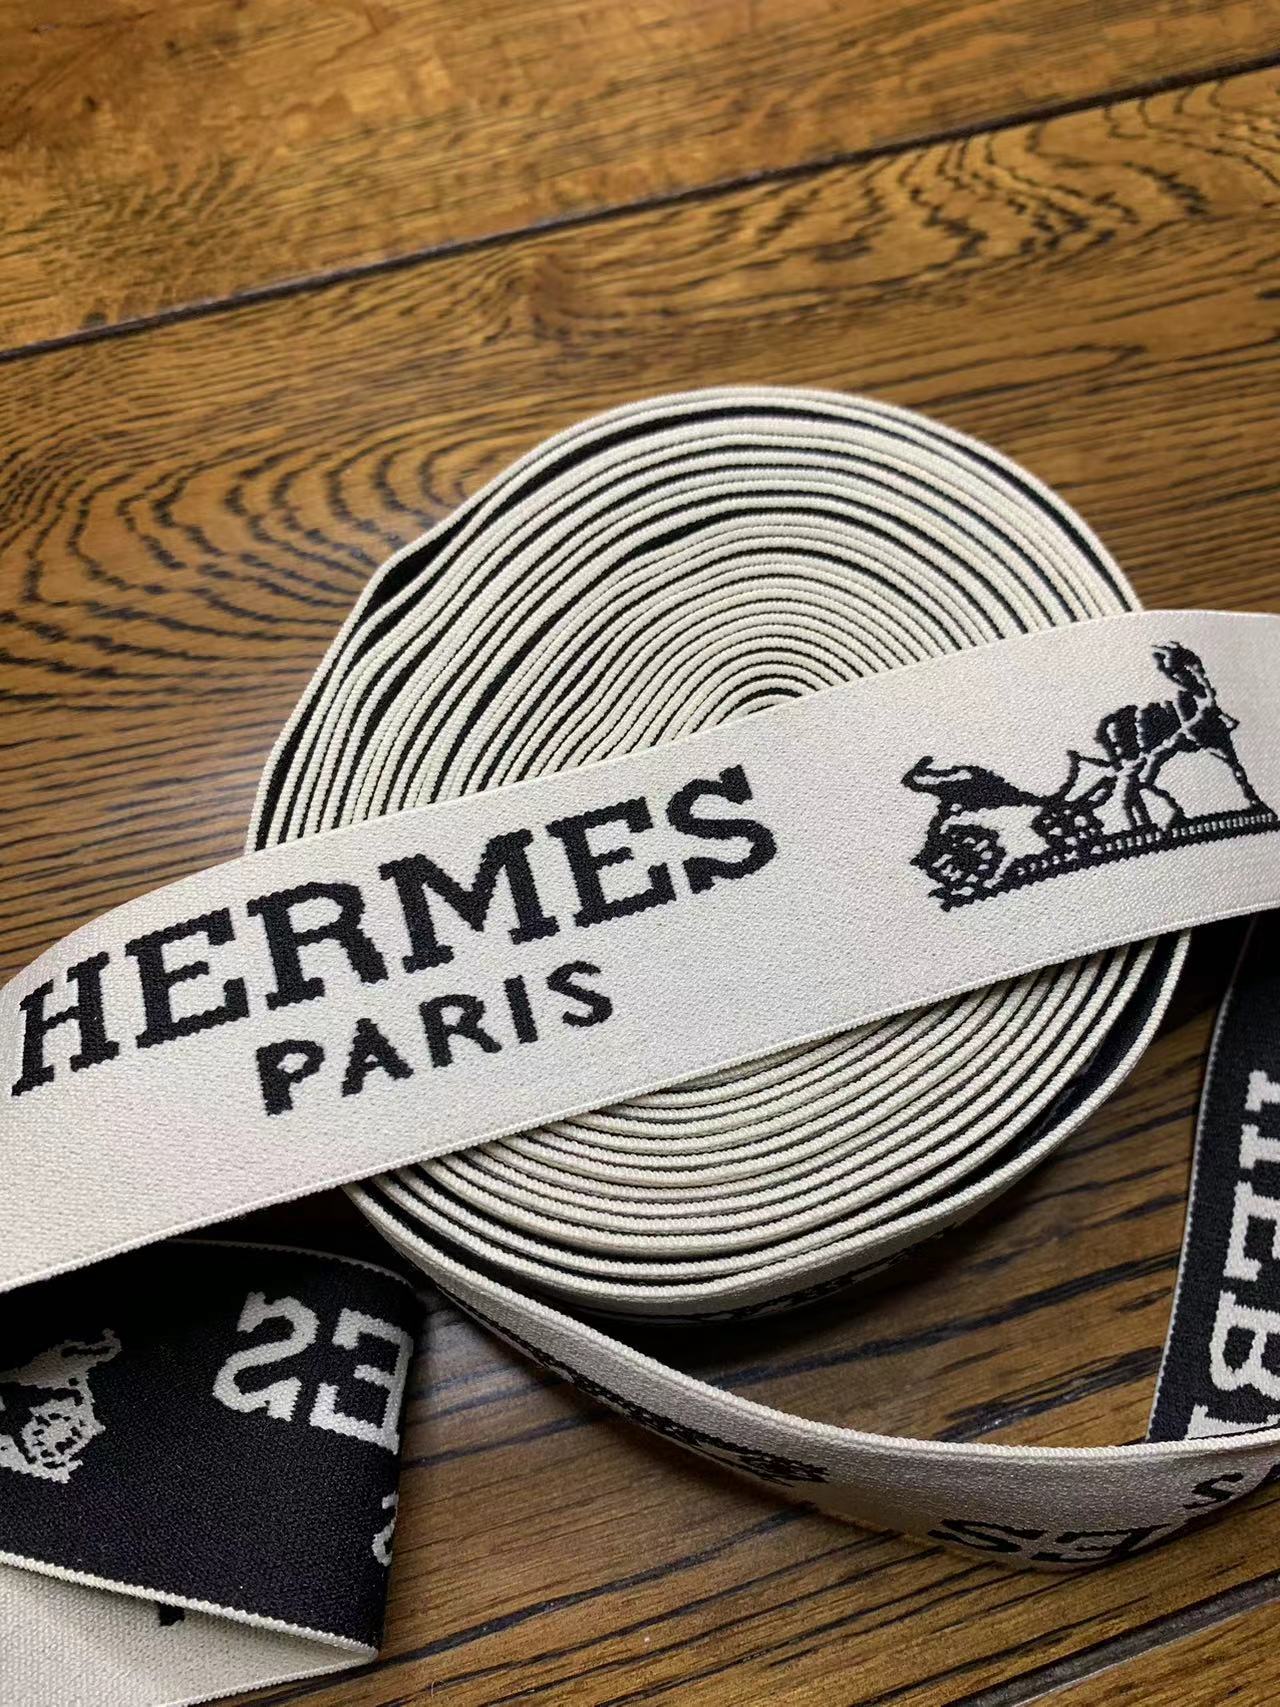 Hermes Paris Elastic Band for Clothing Apparel Headband for DIY Sewing